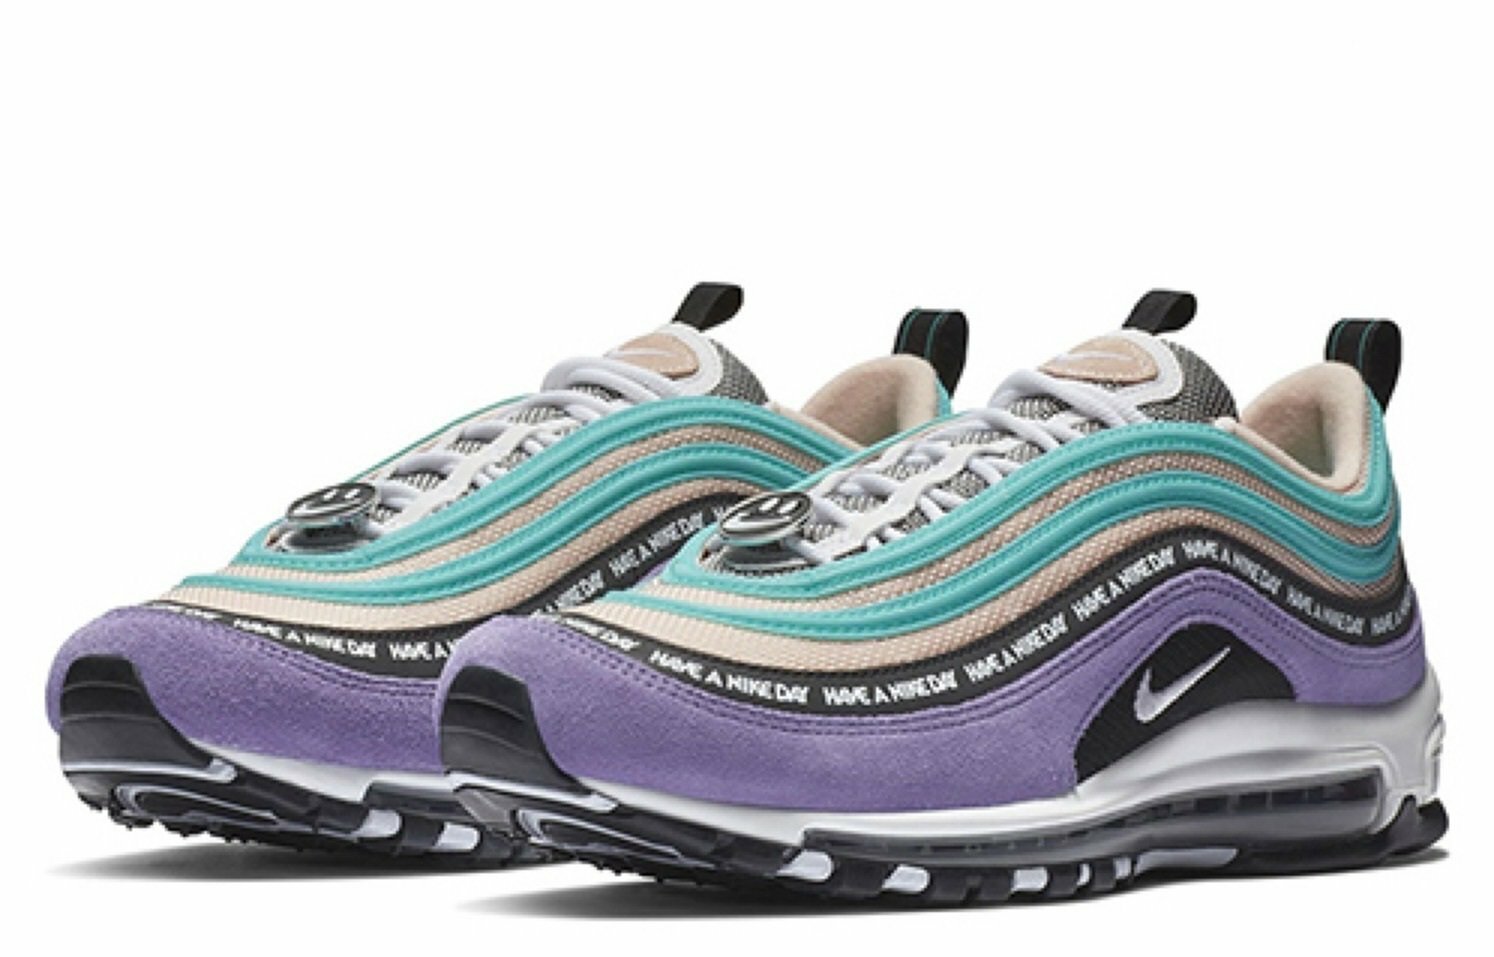 Air Max 97 "Have a Nike Day"